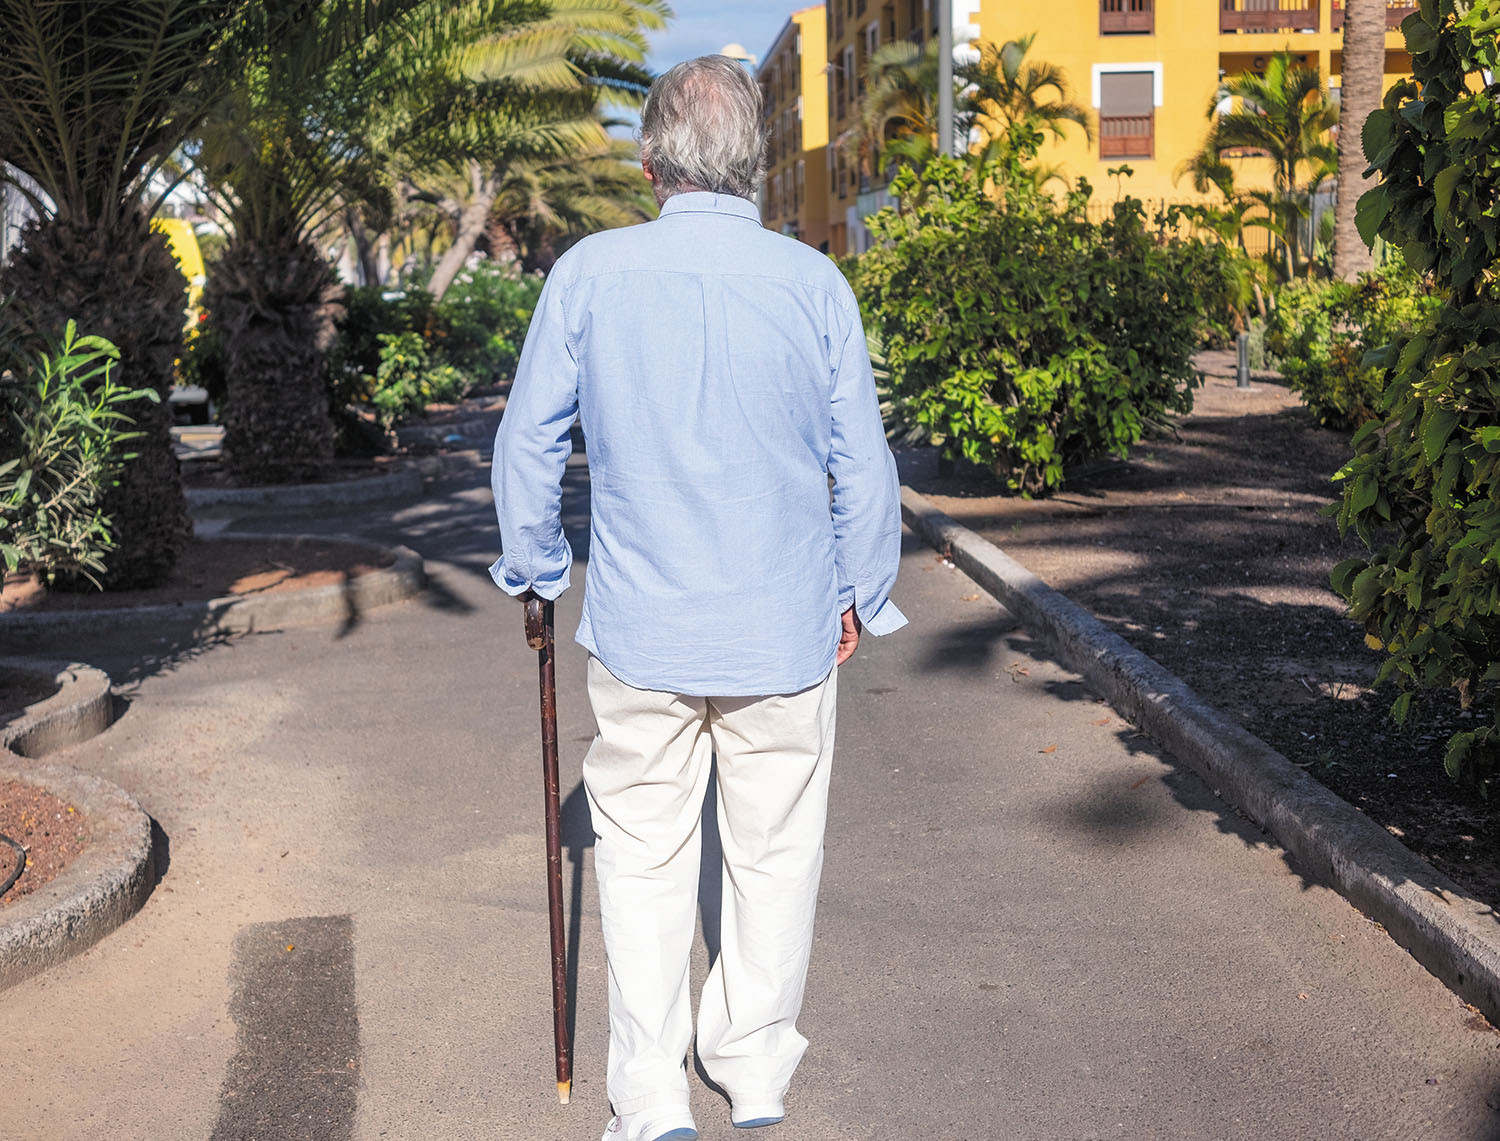 photo of a man walking with a cane, viewed from behind